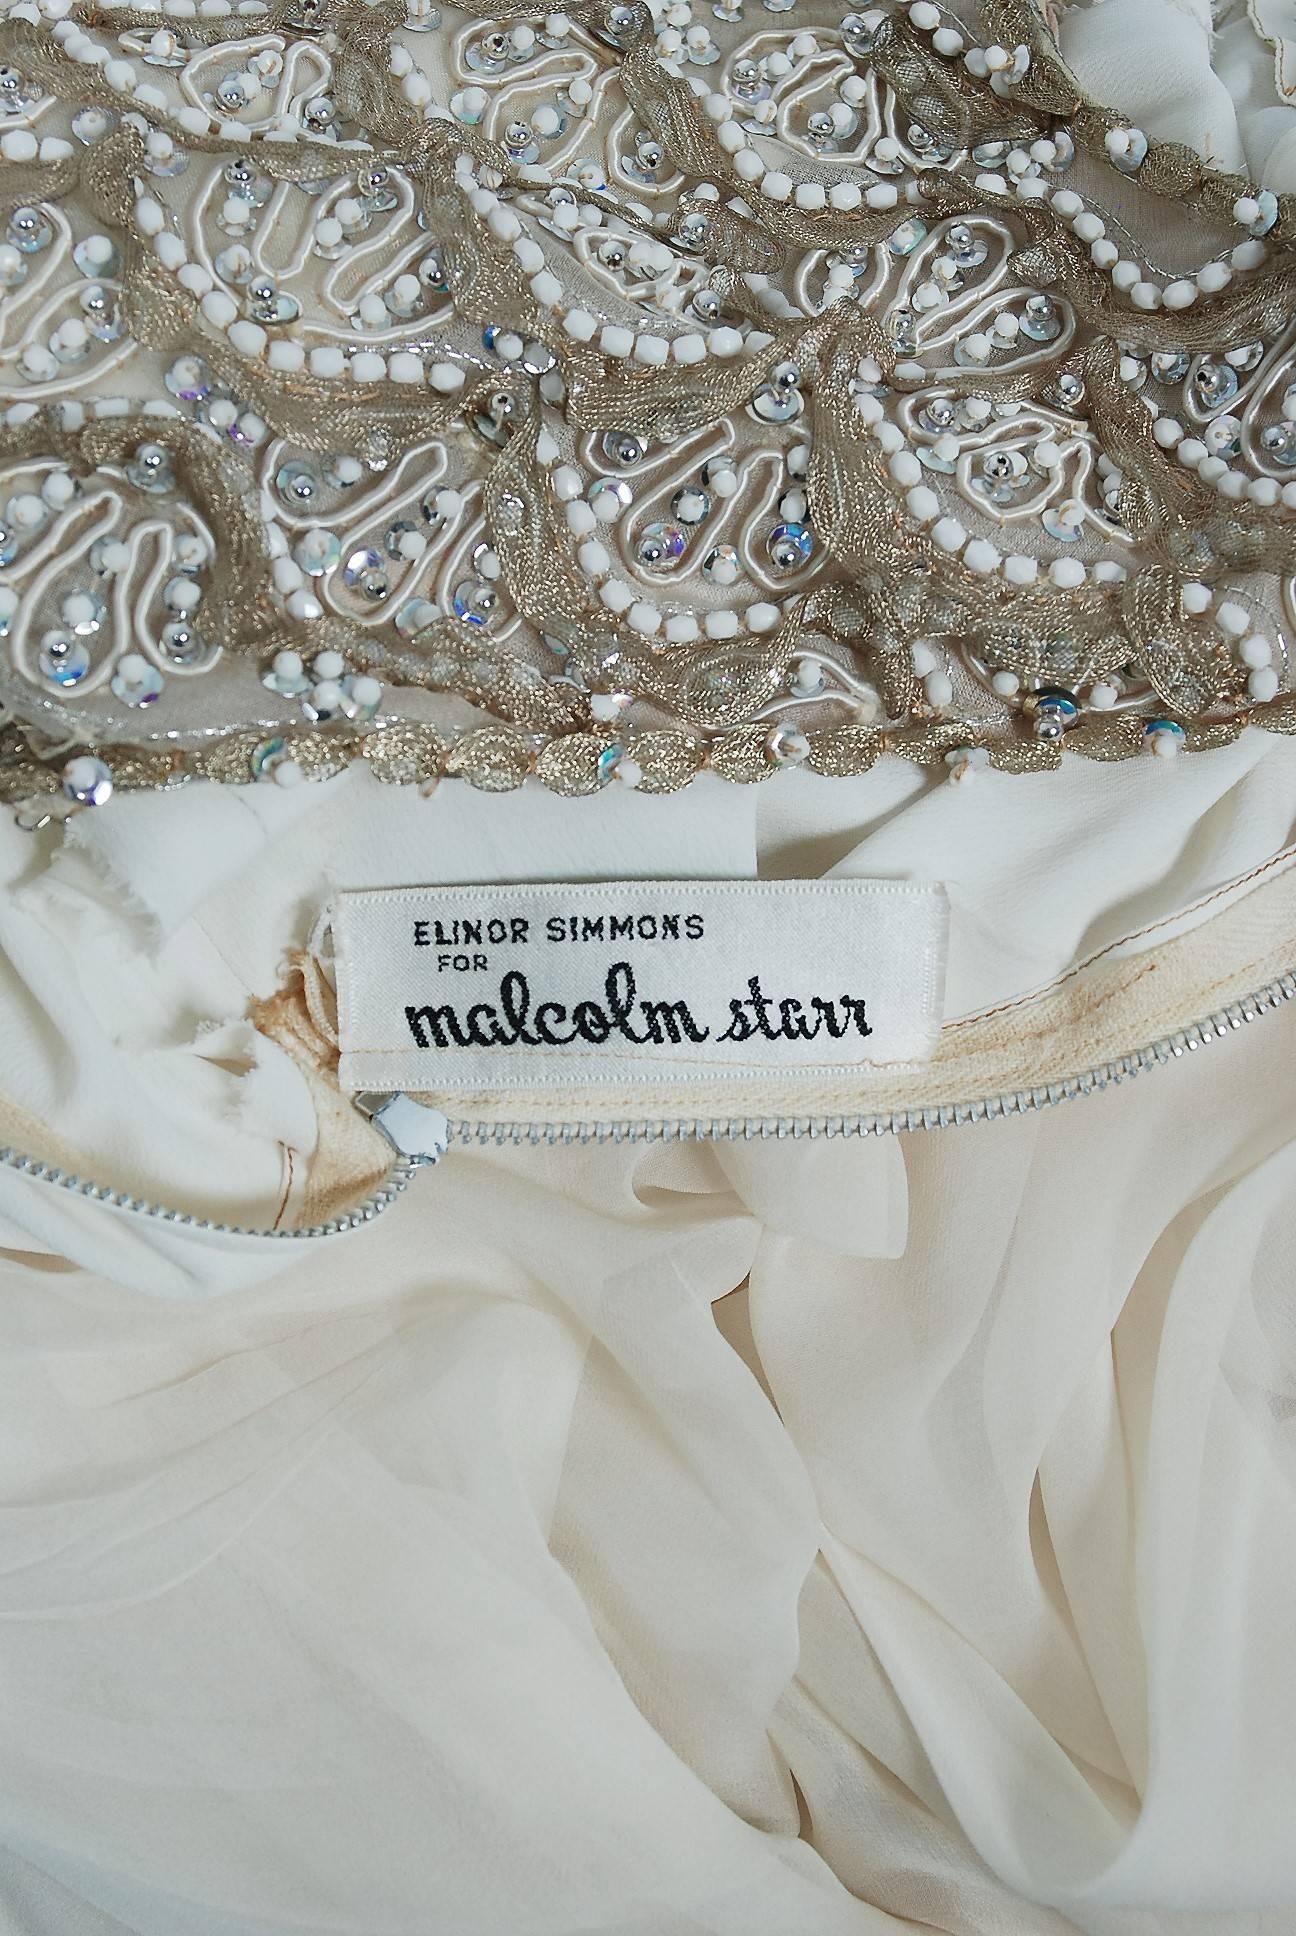 Gray Vintage 1960's Malcolm Starr Beaded Ivory Silk-Chiffon Empire Bridal Dress Gown For Sale